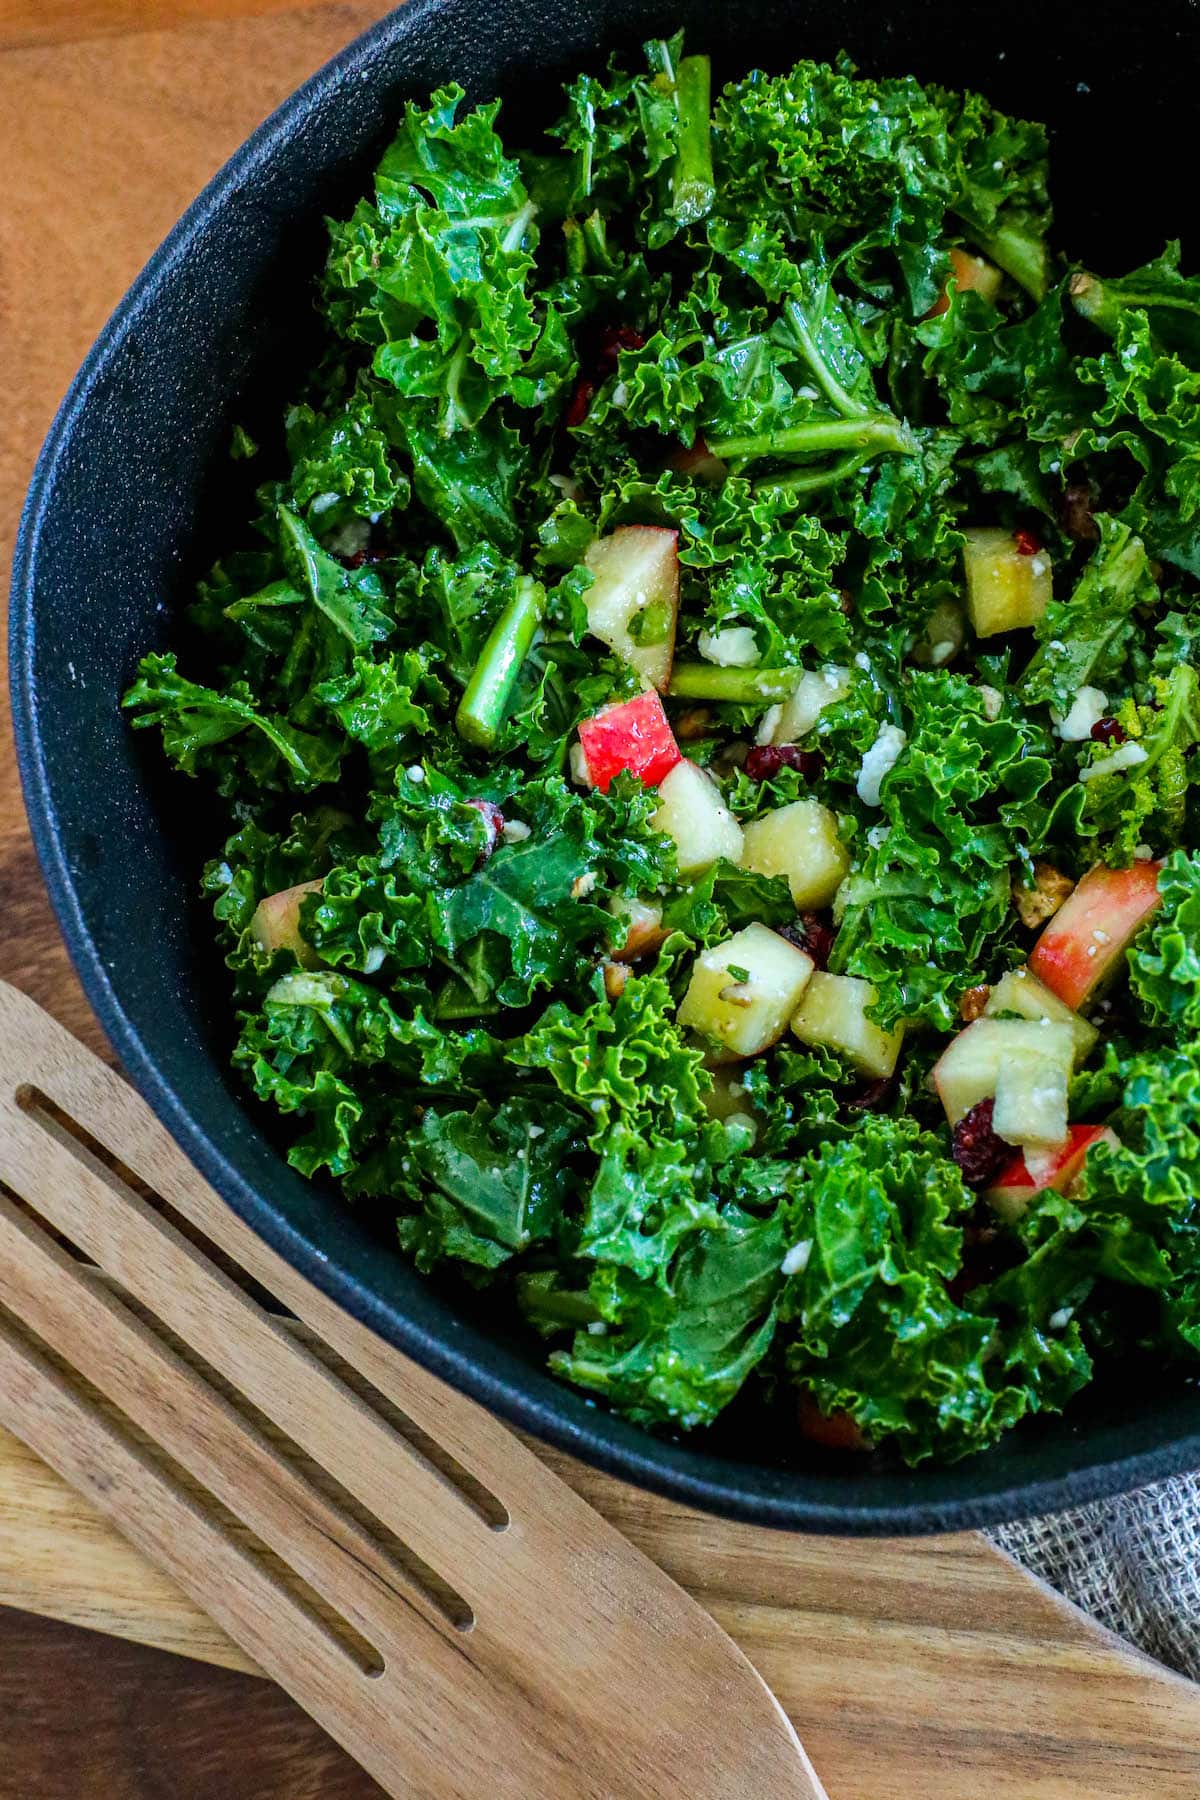 chopped curly kale, craisins, chopped apples, walnuts, and feta cheese crumbles tossed in dressing in a black bowl on a table next to wooden spoons